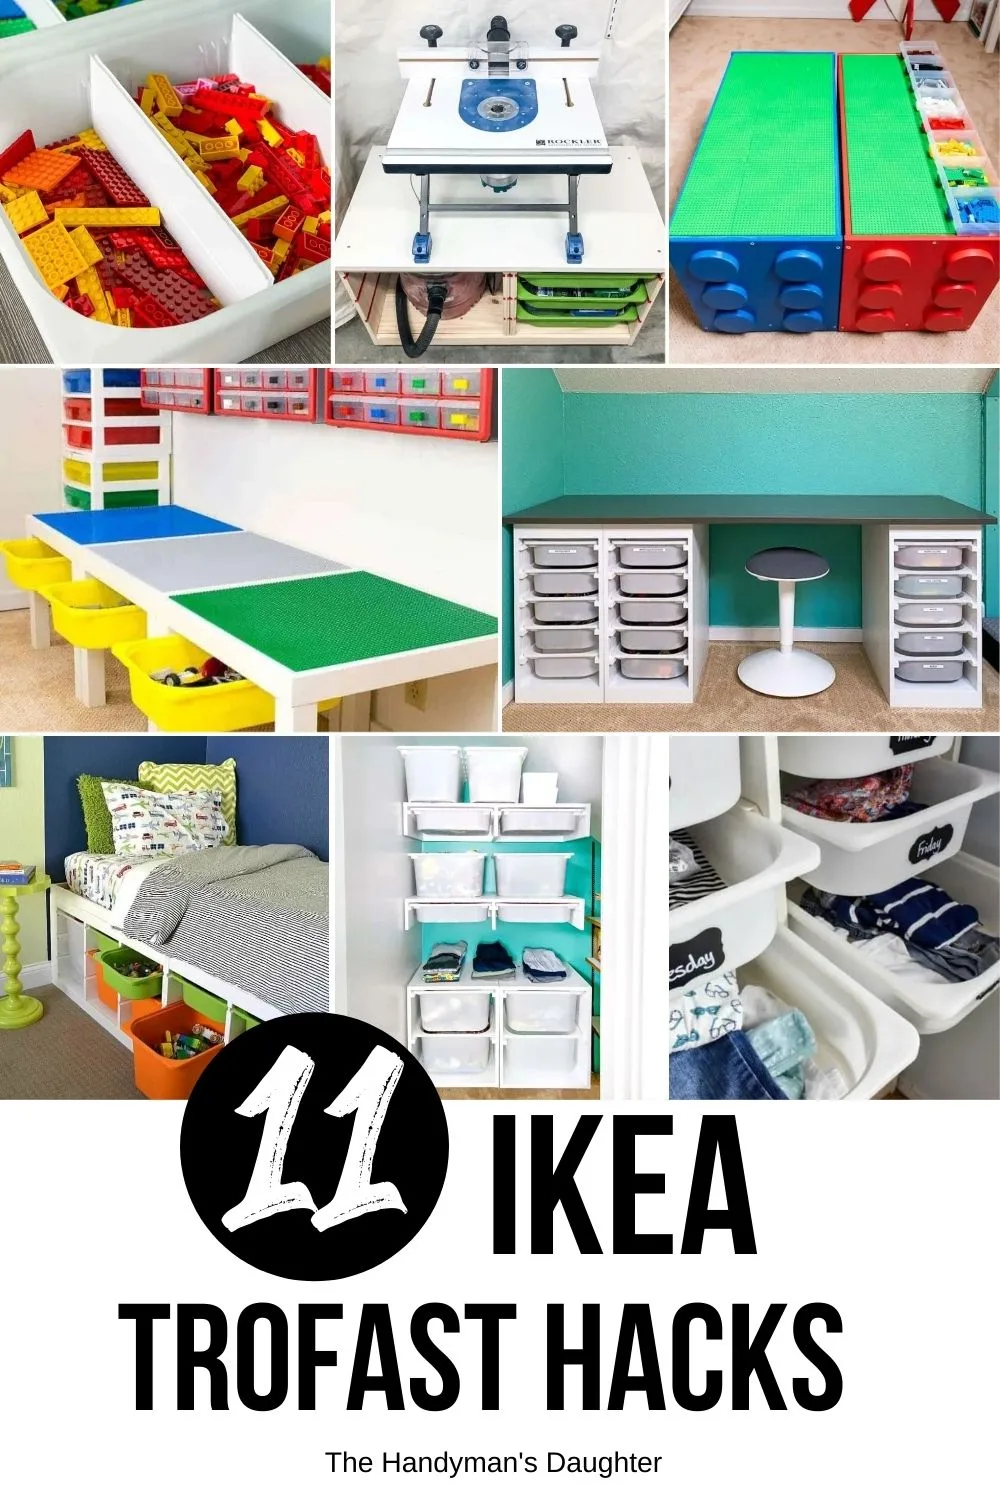 A Storage Solution for Big Toys (and an IKEA hack!)